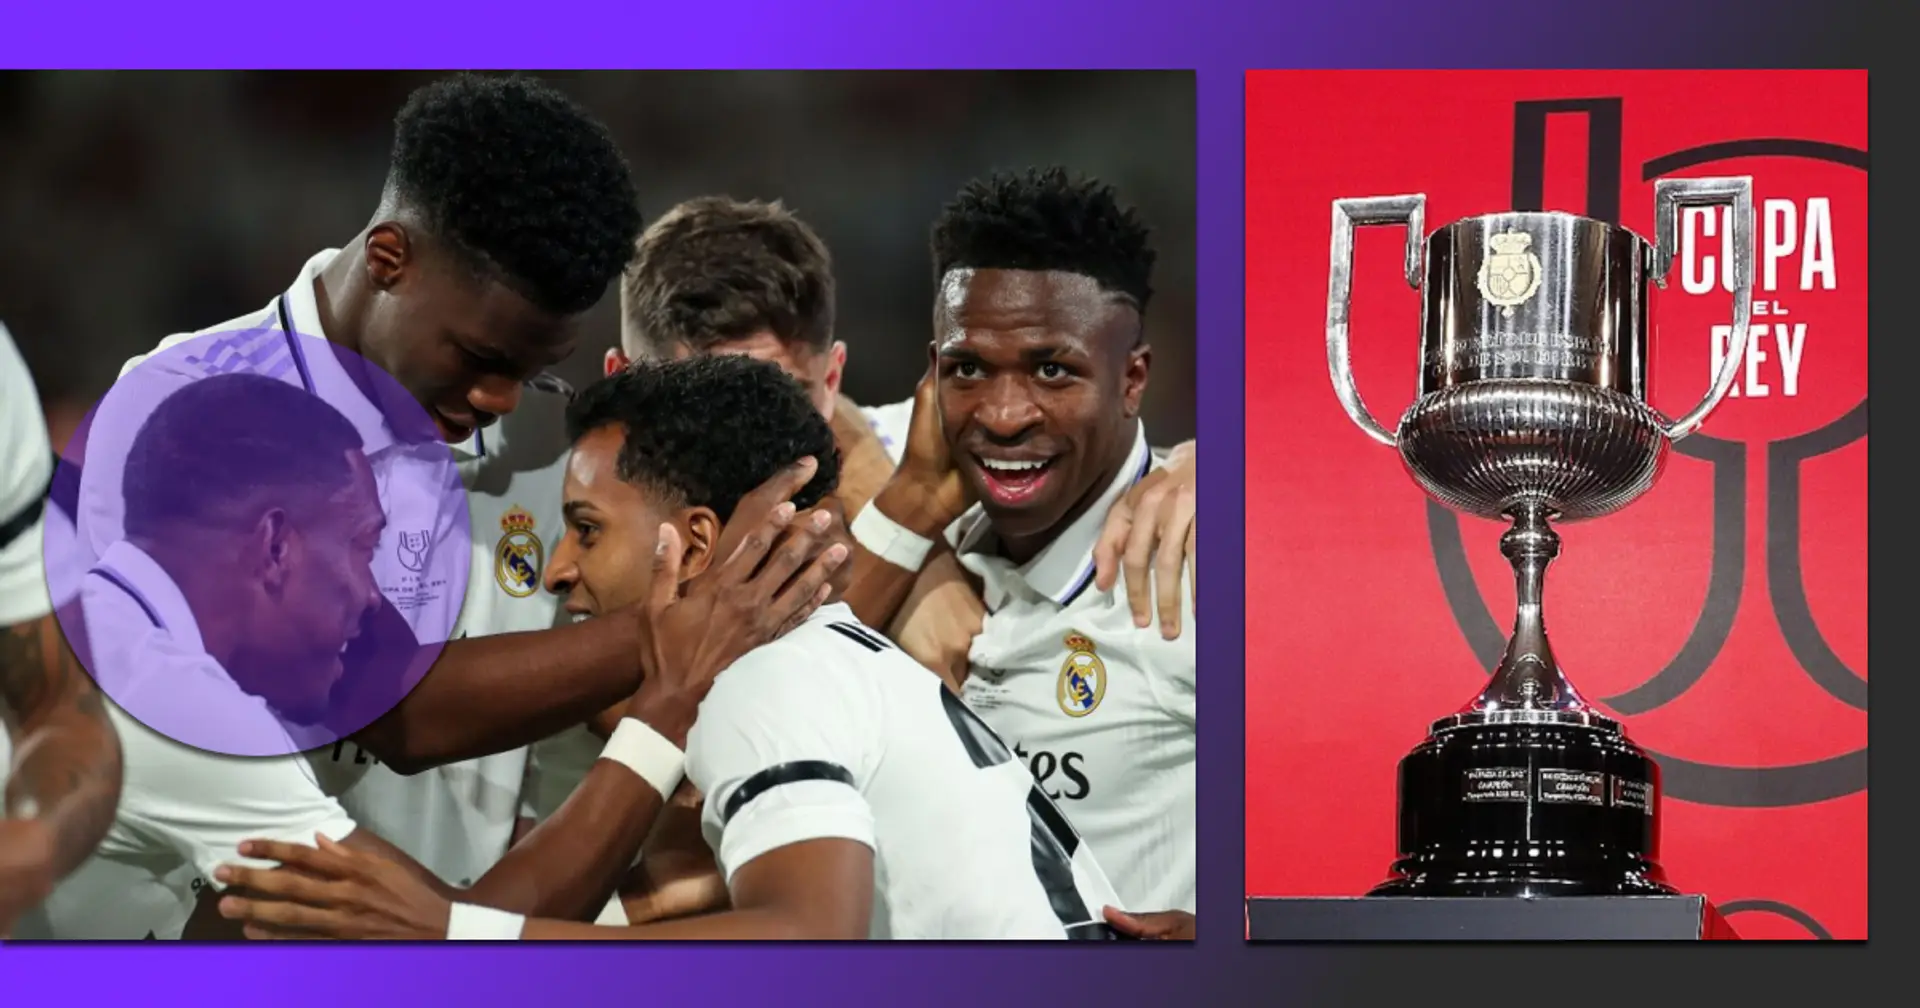 2 Real Madrid players 'complete football' - they've won every trophy possible with two different clubs